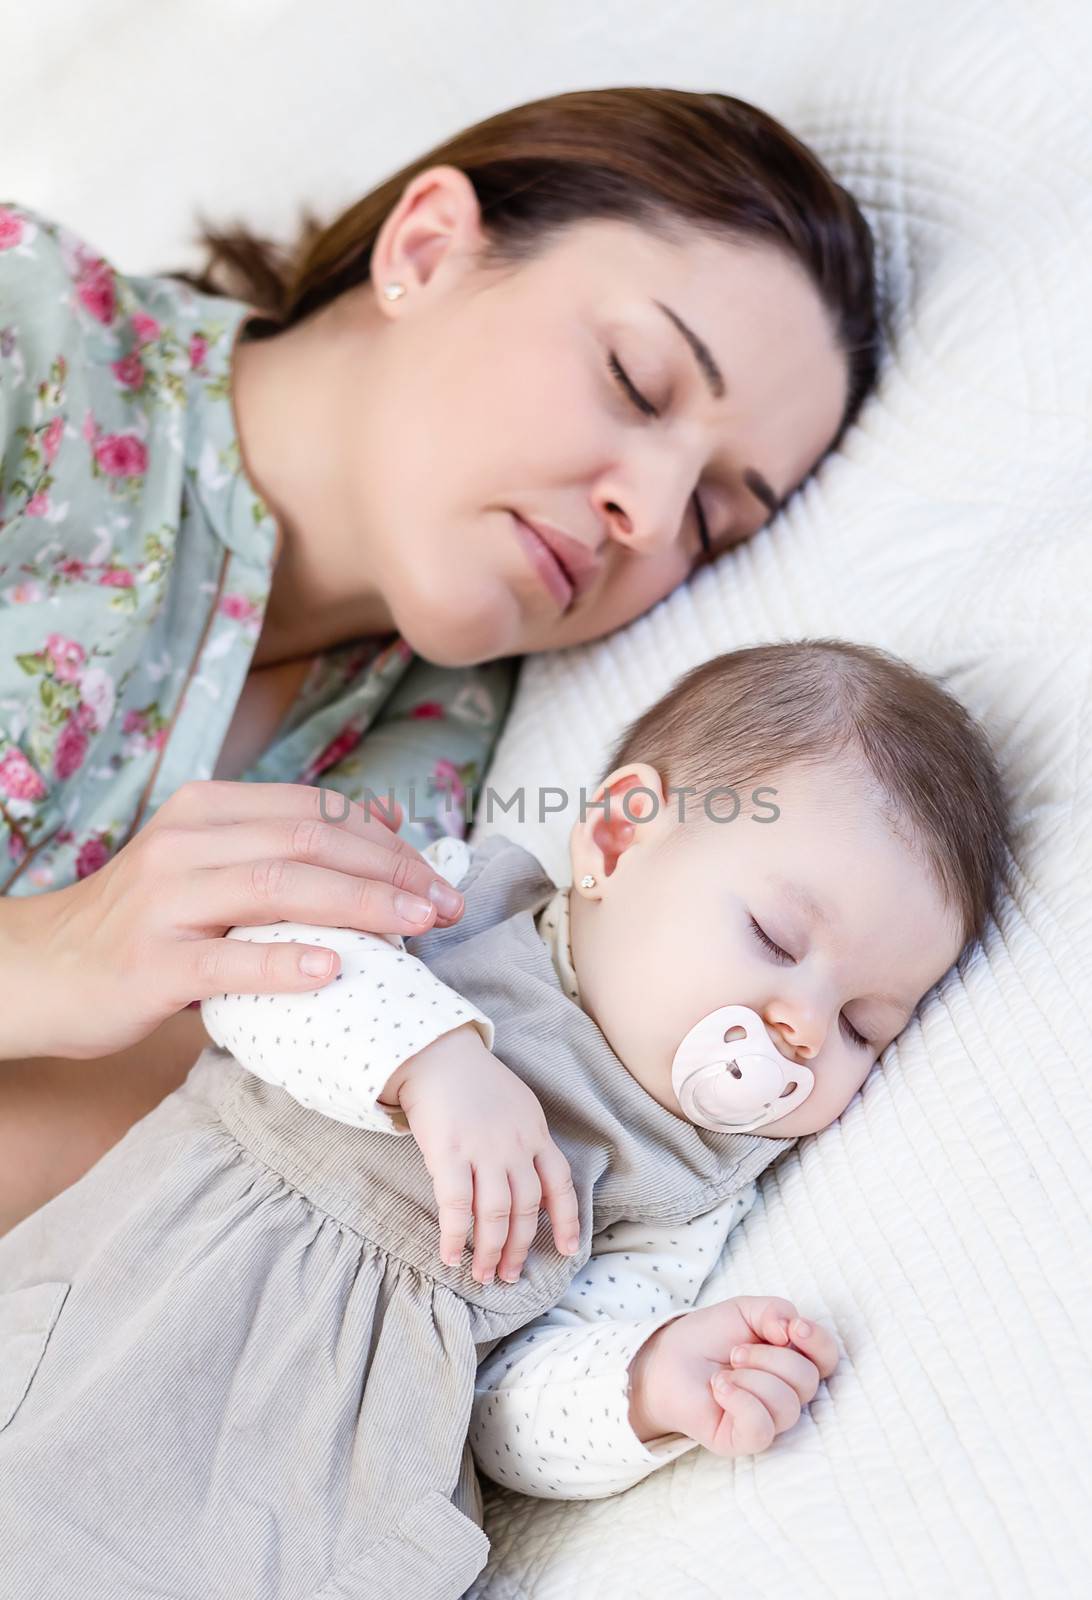 Young mother and her baby girl sleeping in the bed by doble.d